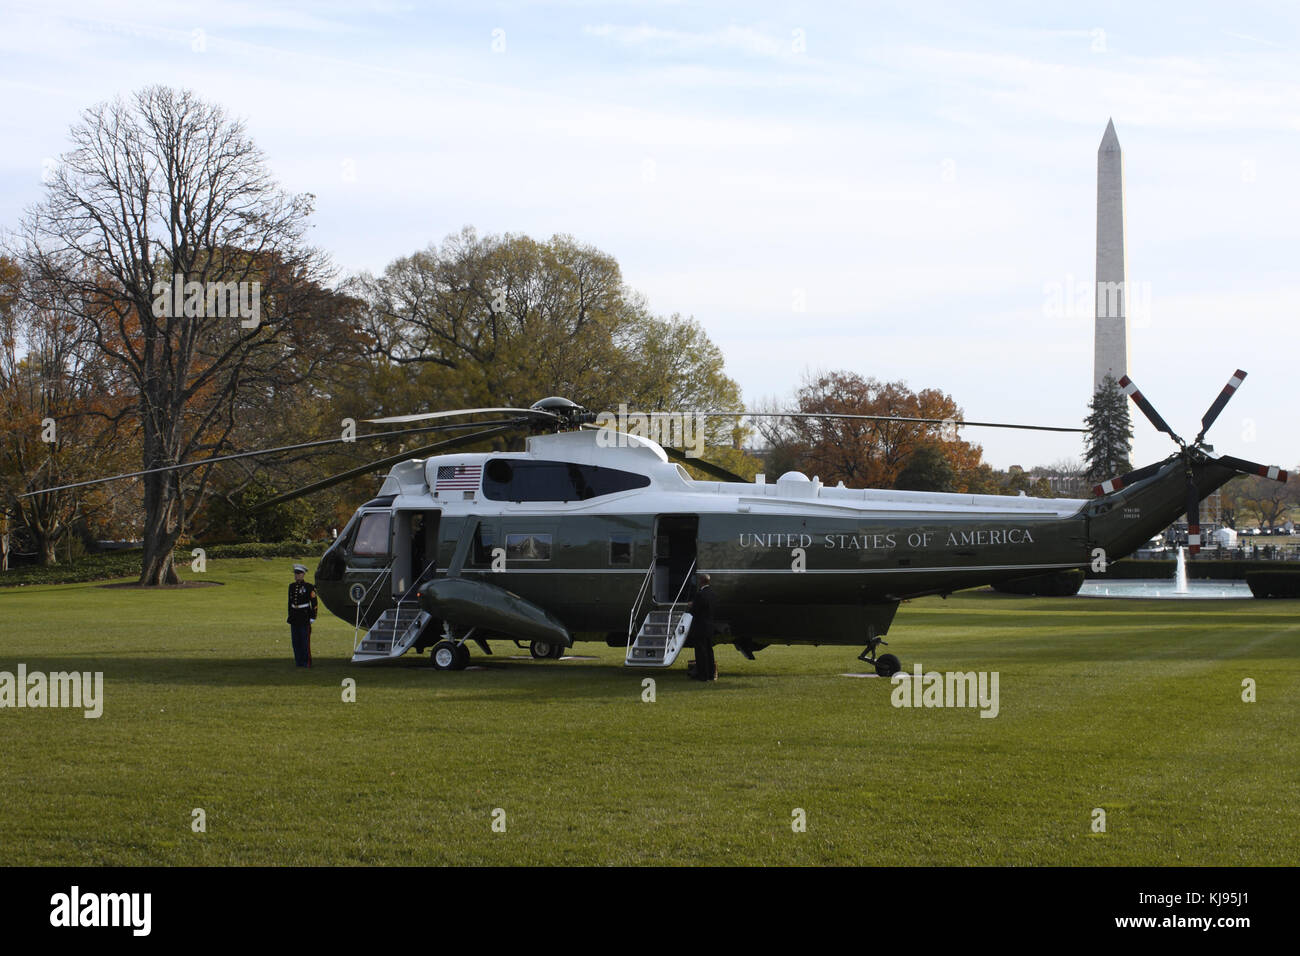 Washington, District of Columbia, USA. 21st Nov, 2017. A marine Sikorsky VH-3D Sea King helicopter waiting for President Trump on the South Lawn of the White House, to take him to Joint Base Andrews. Seen in the background is the Washington Monument. Credit: Evan Golub/ZUMA Wire/Alamy Live News Stock Photo